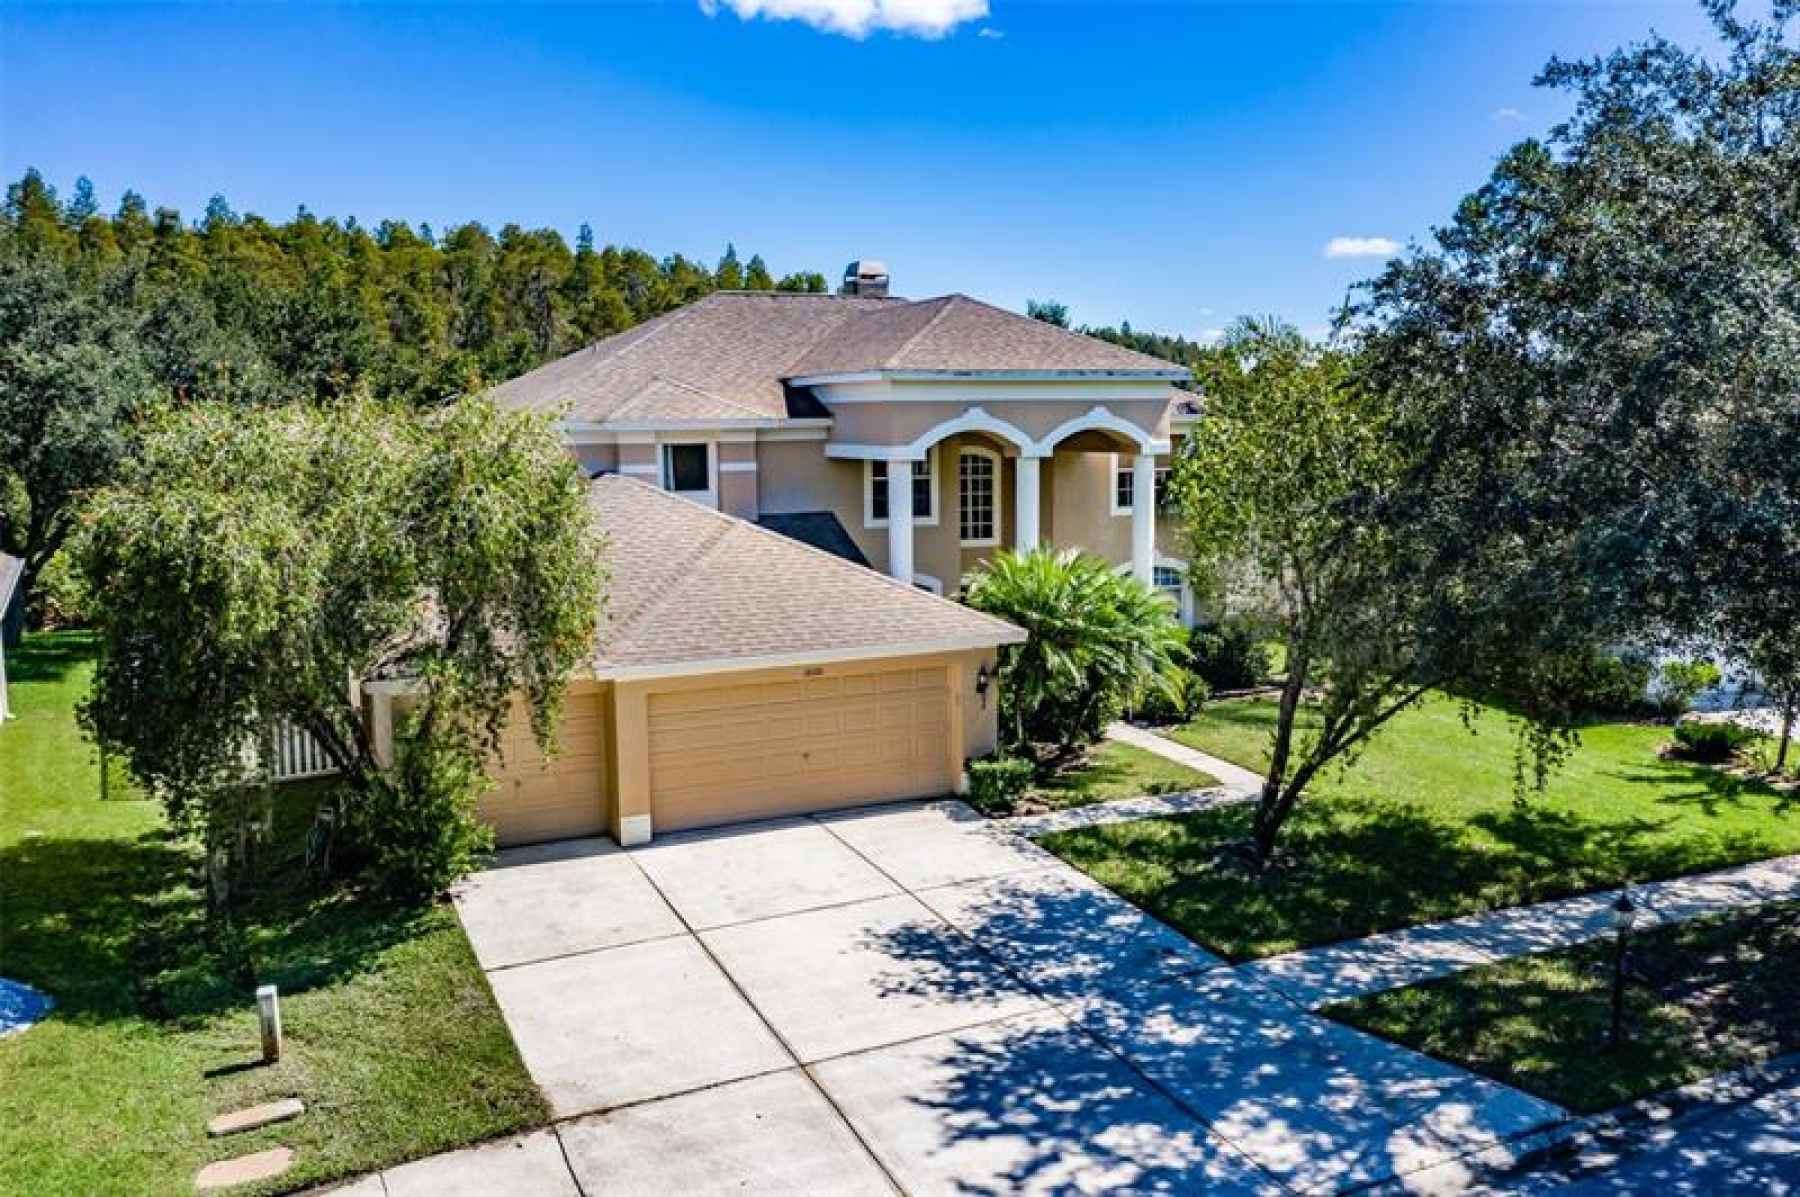 Welcome Home to 10526 Plantation Bay Drive!